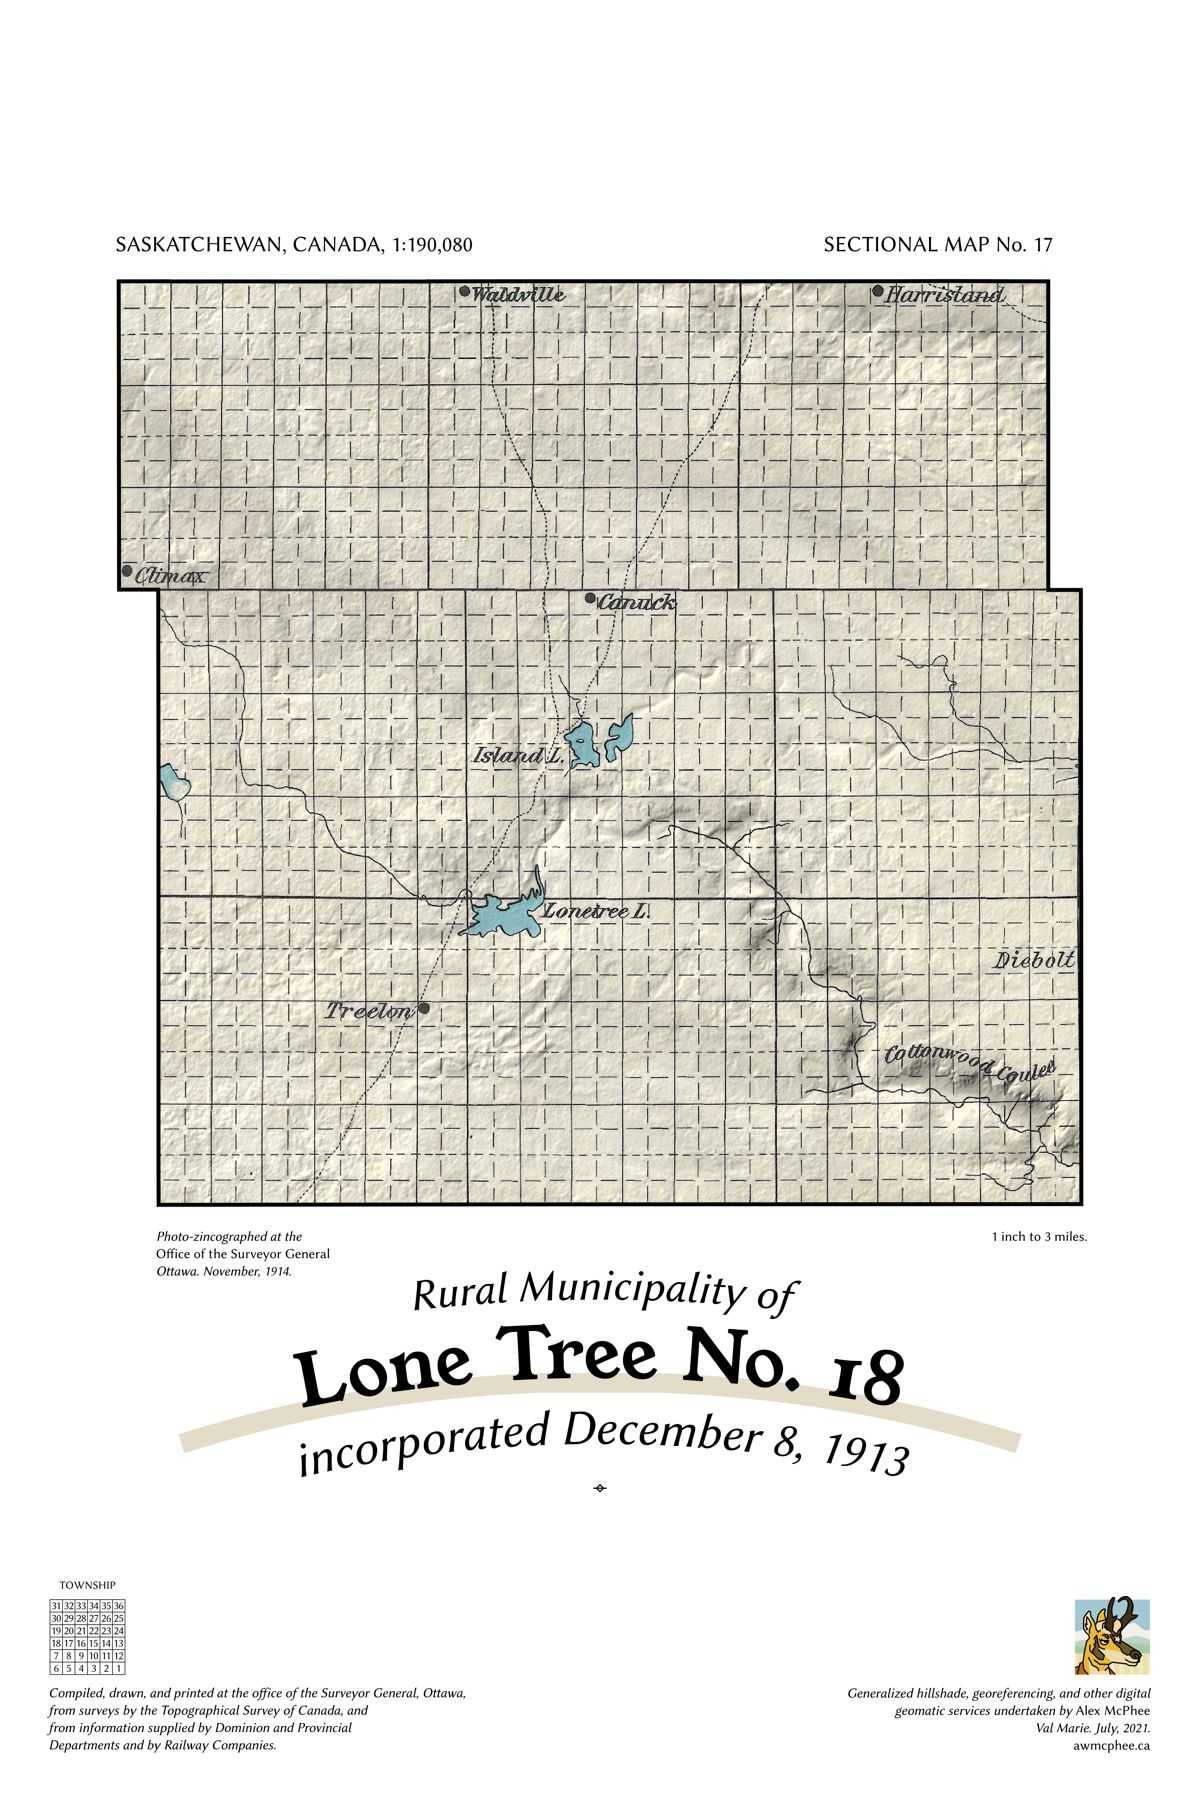 A map of the Rural Municipality of Lone Tree No. 18.